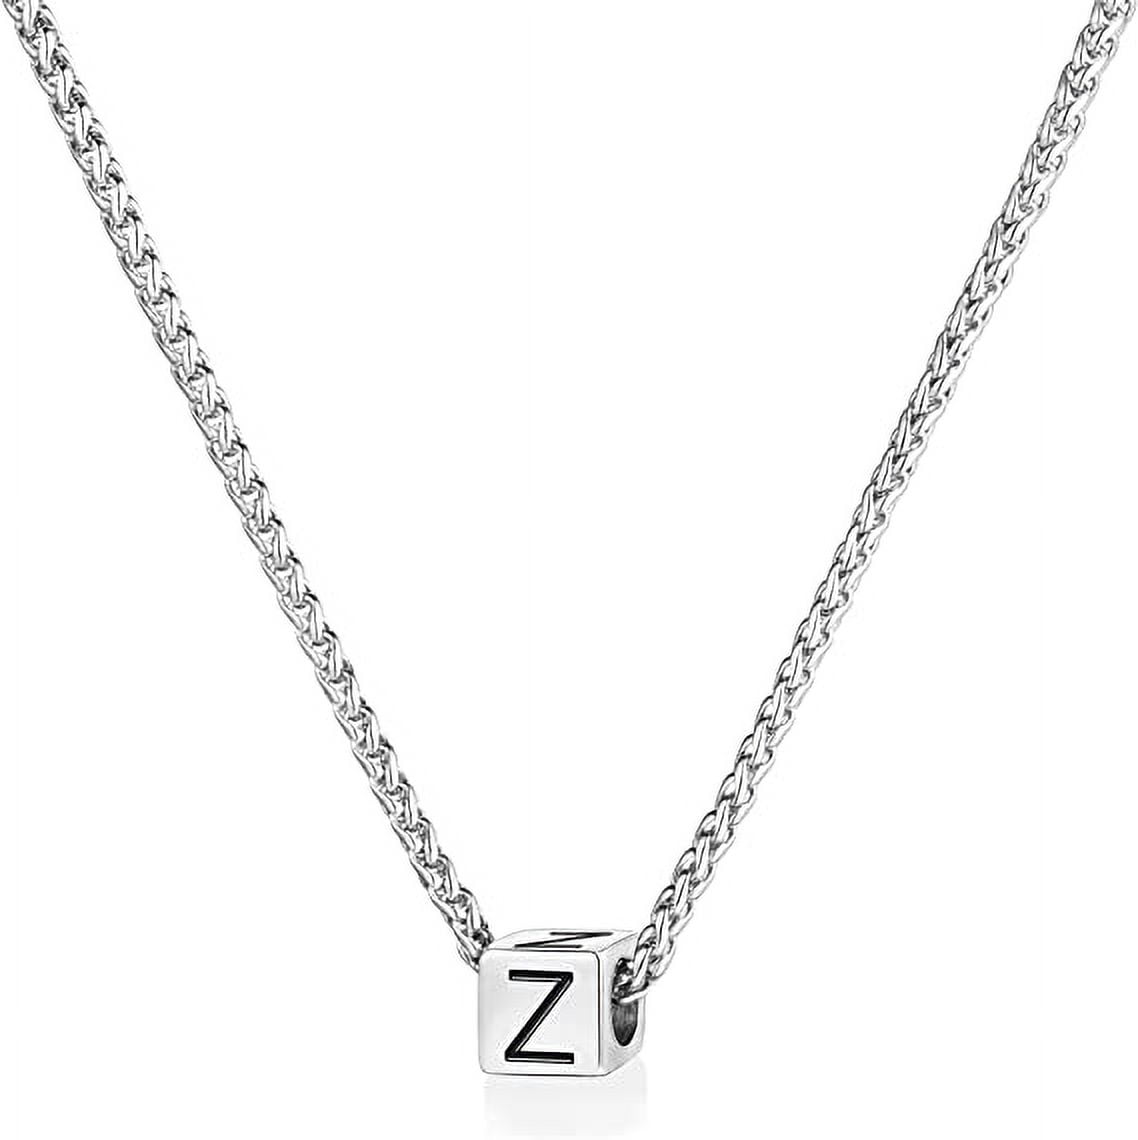 JSJOY Initial Necklaces Men Silver Tiny Mens Letter Necklace Jewelry Gifts A Z Capital Stainless Steel Franco Chain 18inch Graduation Him 2048 ab3c4740 58a1 4432 8ec2 347ec97ca474.f8f609556ffa4548f2ceac2869f4ef36